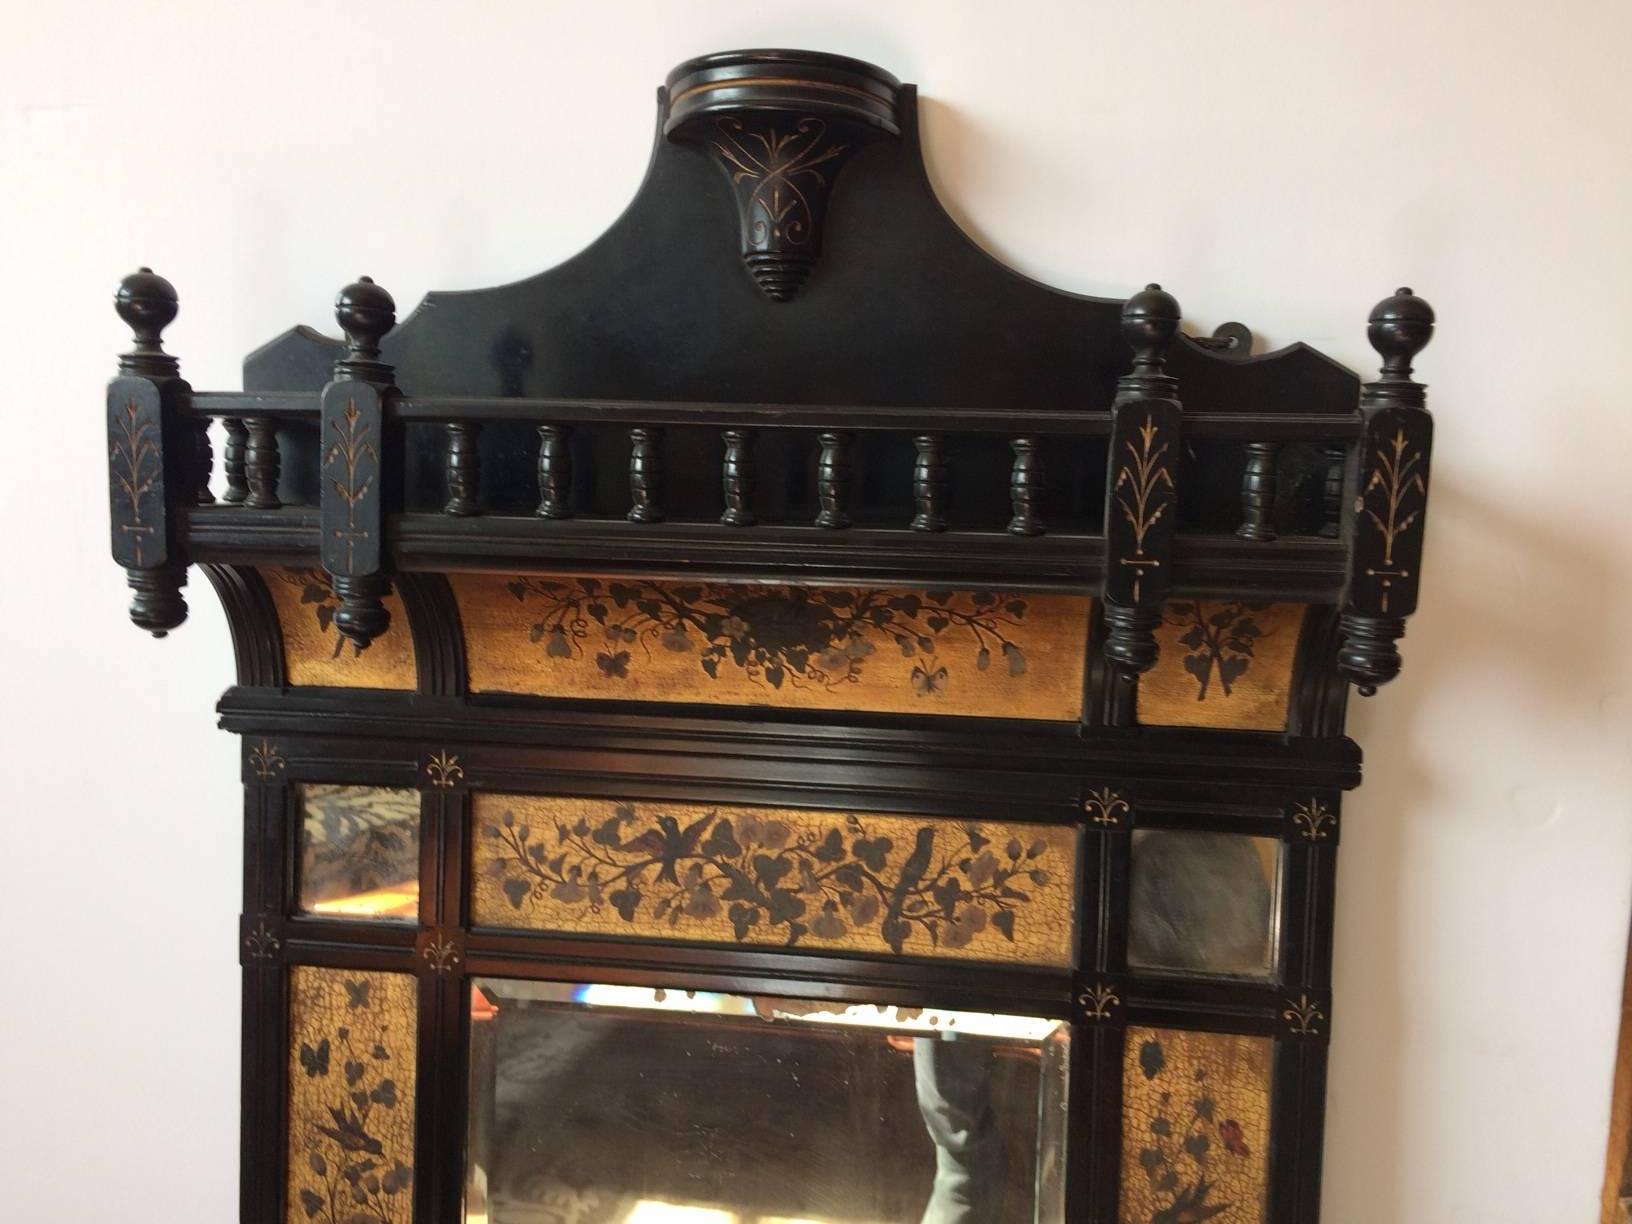 Beautiful antique mirror or Victorian what not" shelf, having painted panels with gold backgrouds around a central bevelled mirror, plus an elaborate ebonized wood gallery at the top.